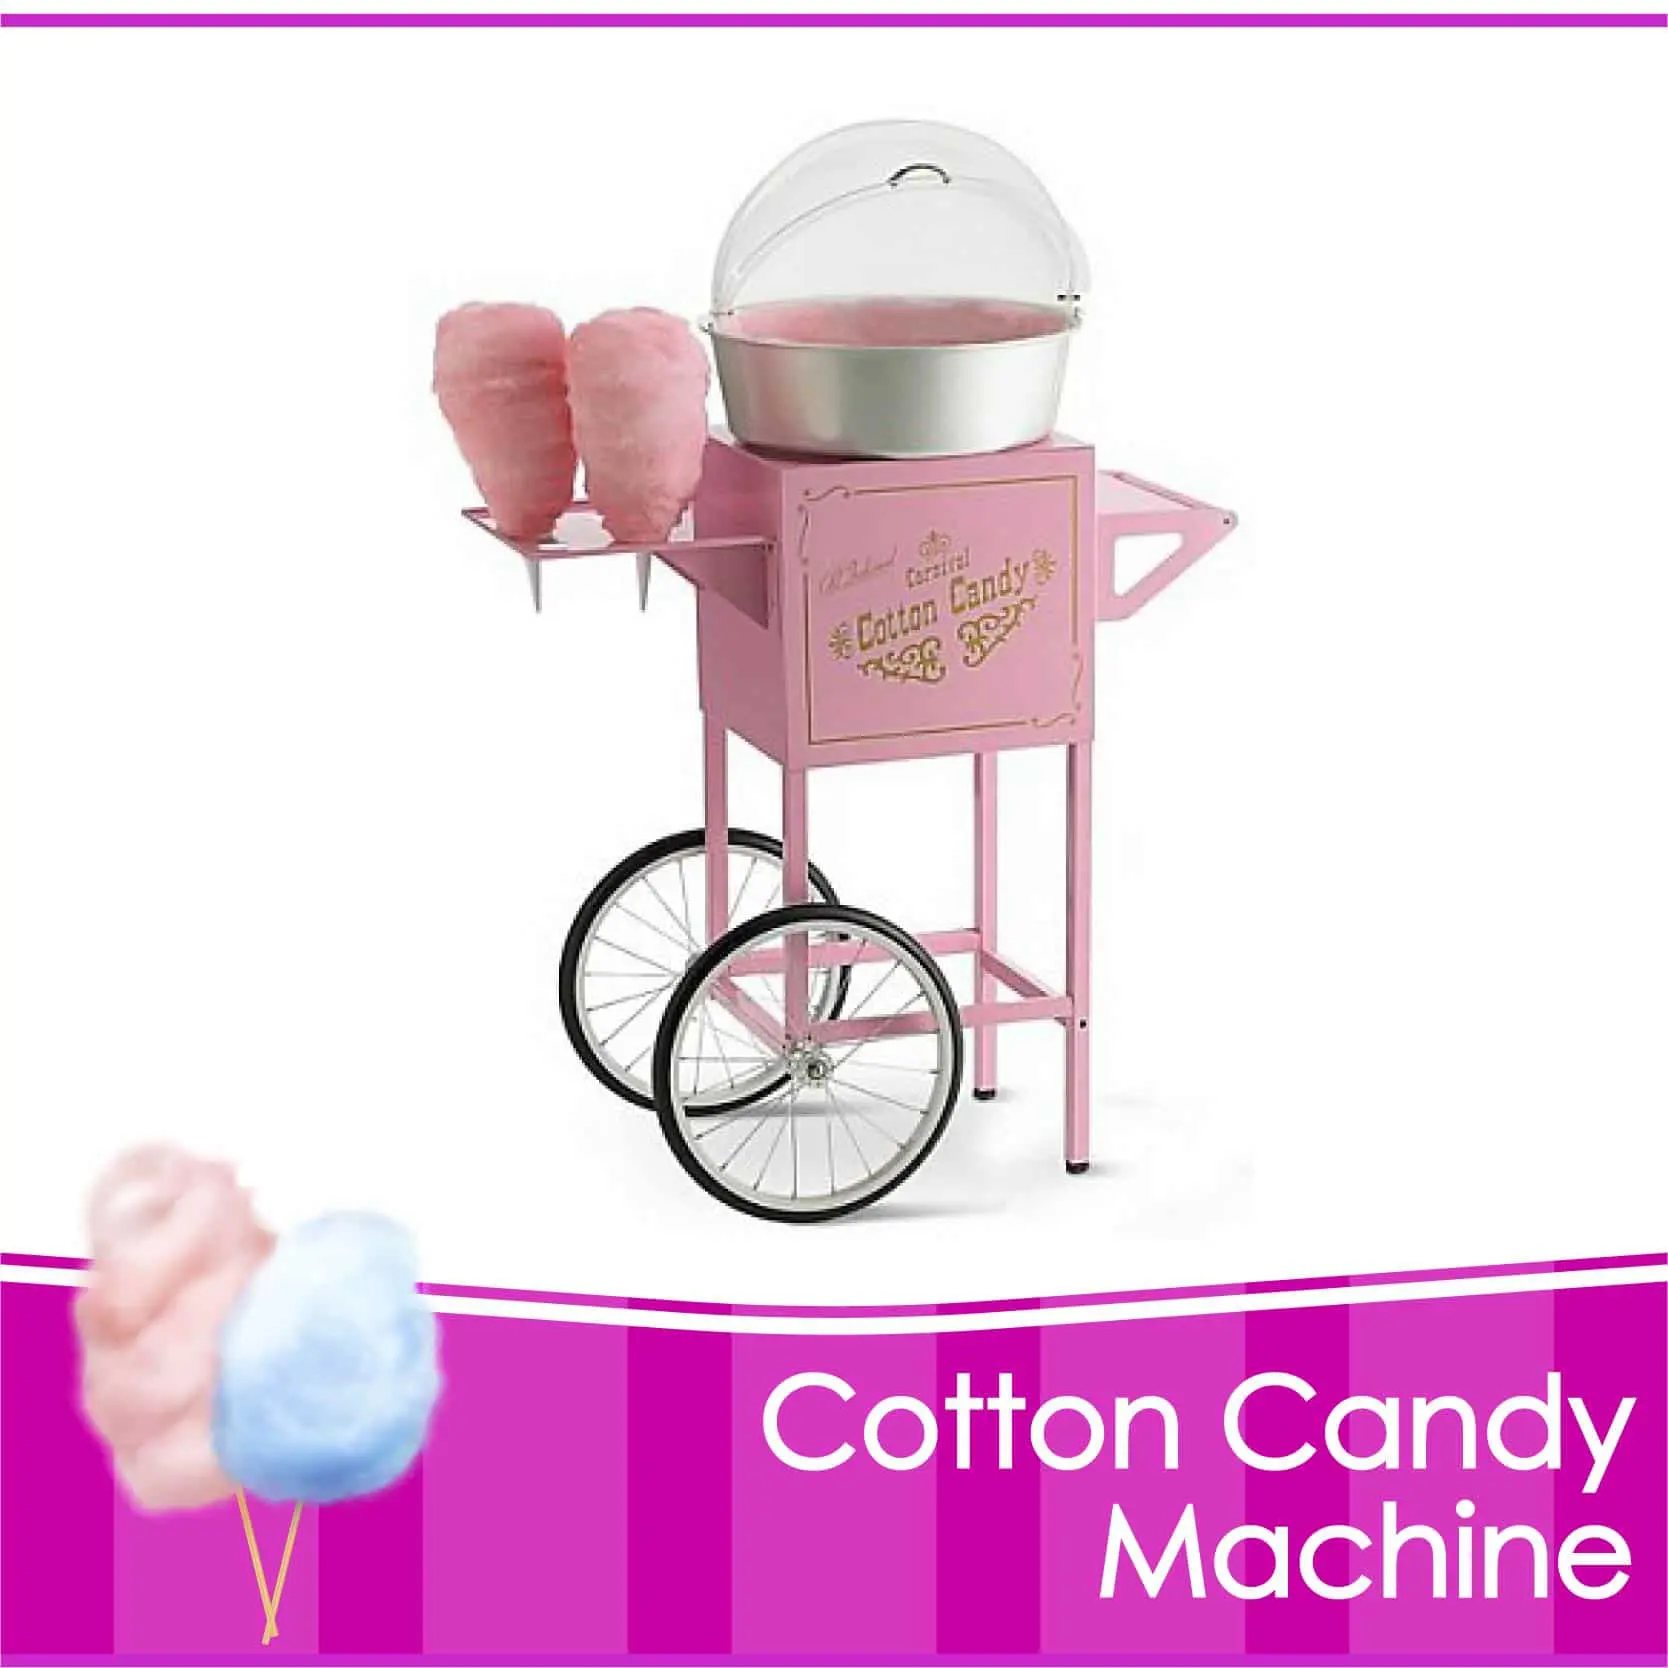 Cotton Candy Machine in NY